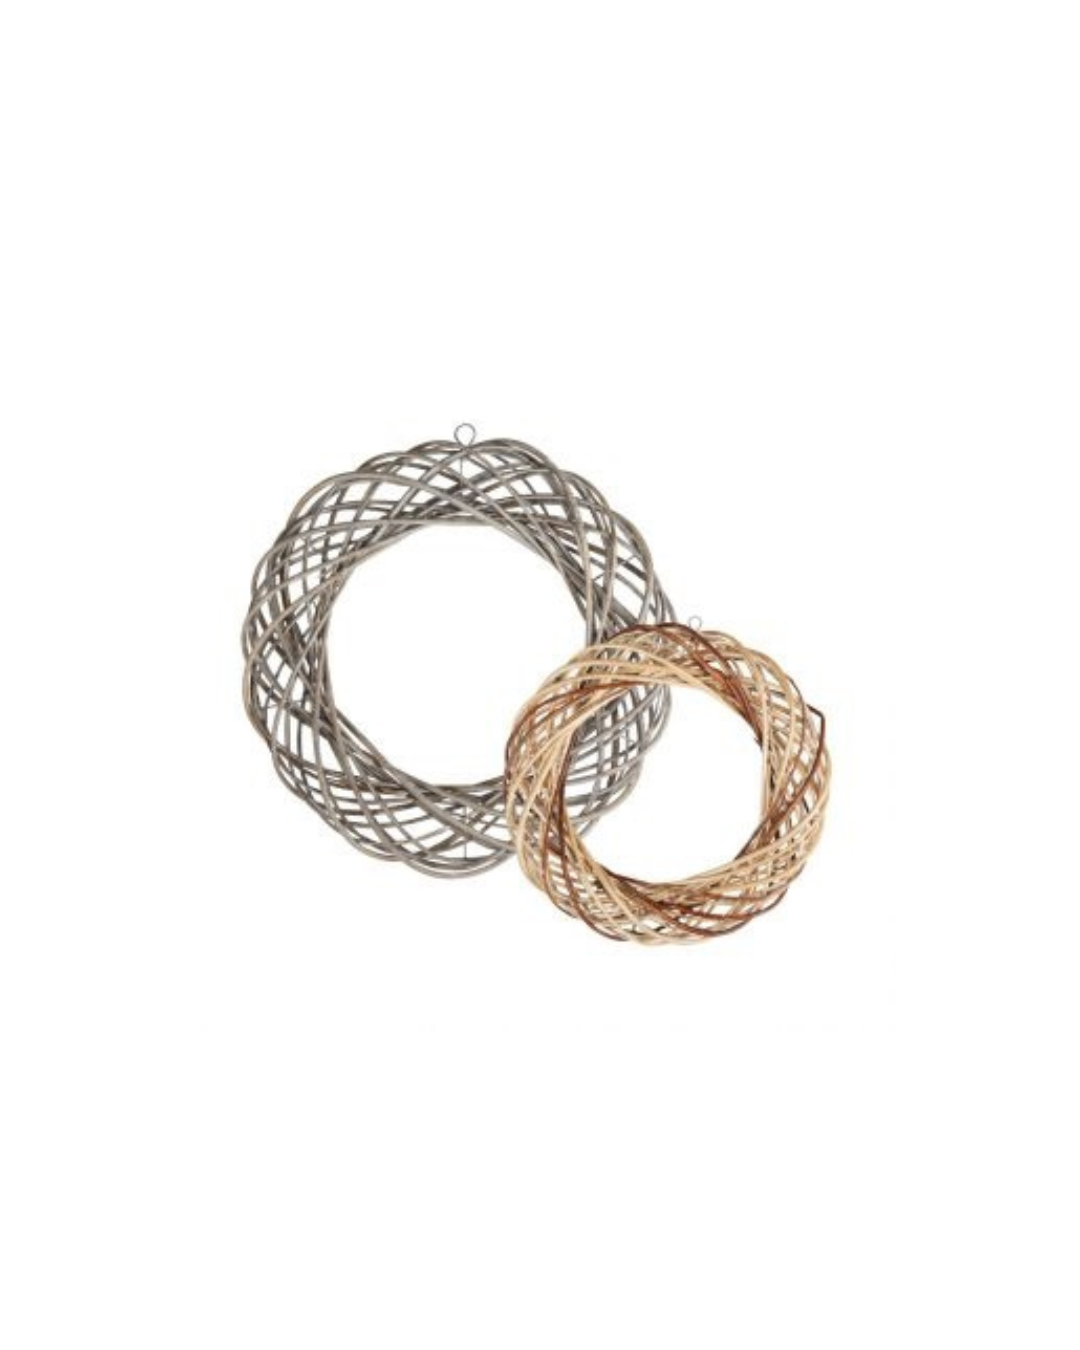 Willow Wreath Rings